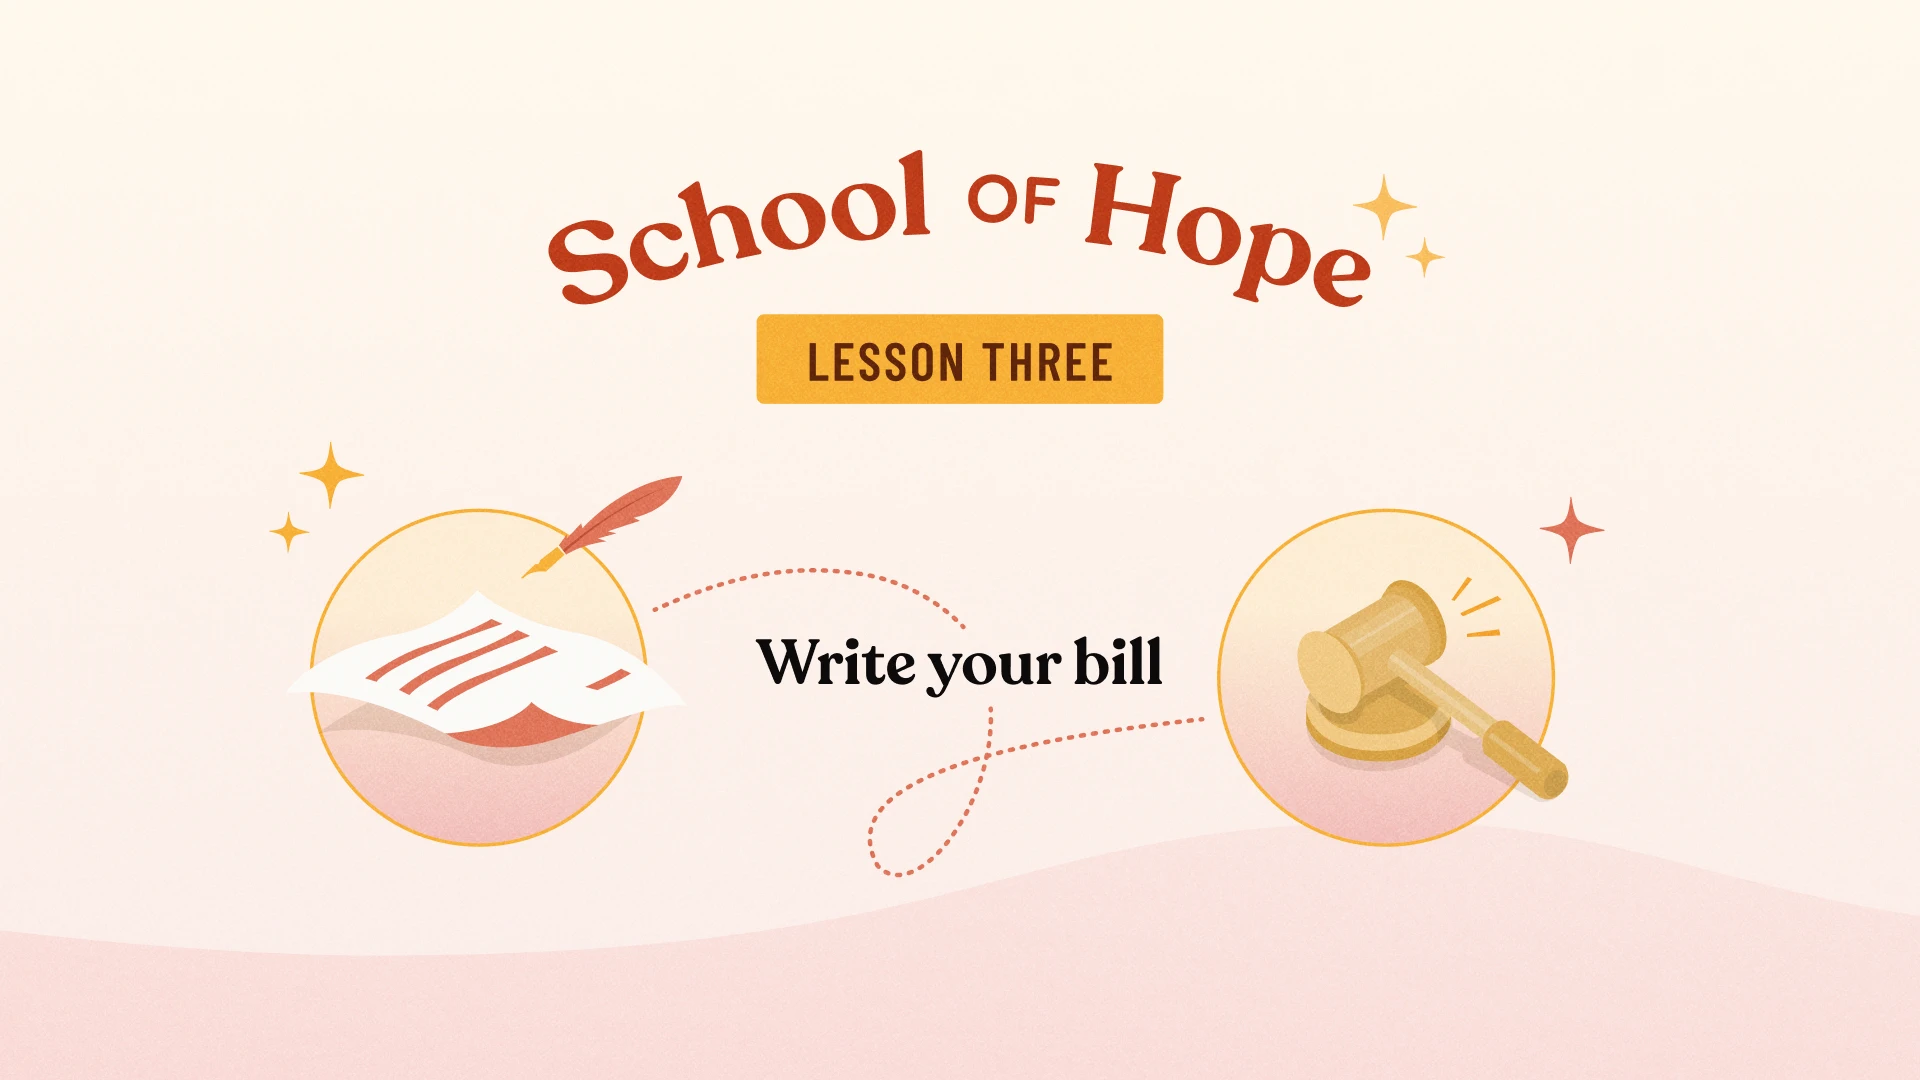 How to write your bill